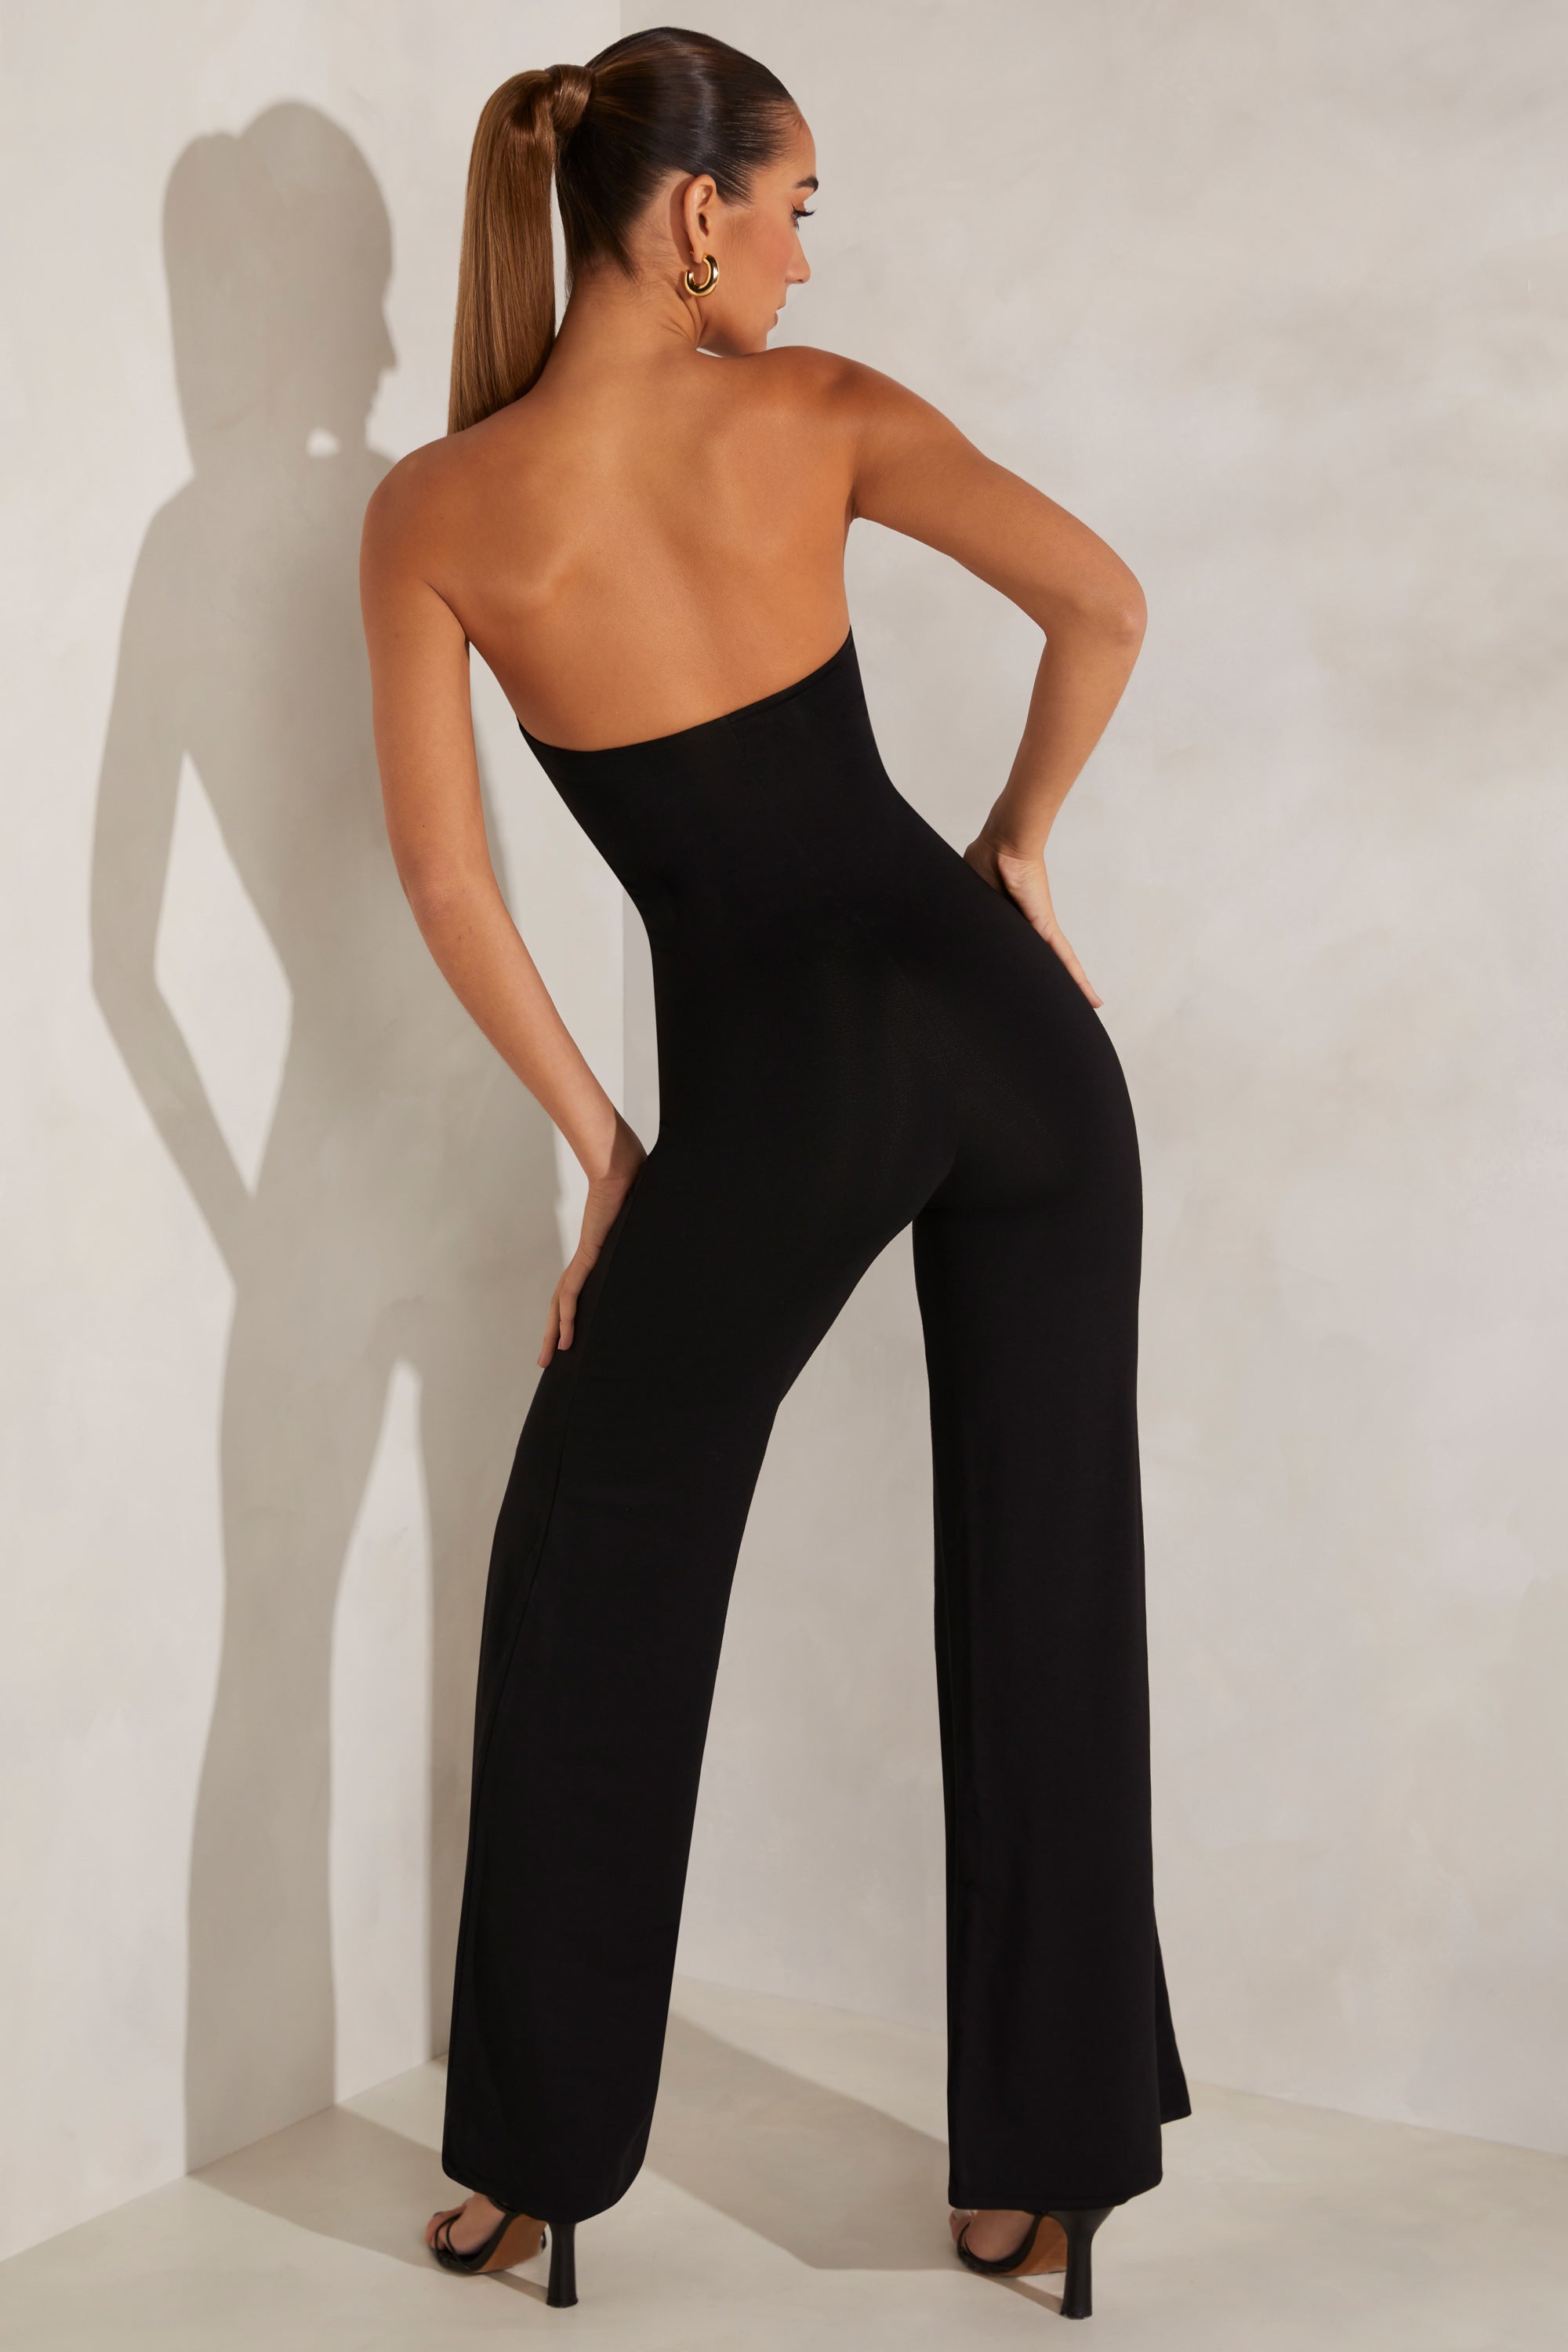 Lulus Ready To Impress Hot Pink Strapless Tie-Front Wide-Leg Jumpsuit worn  by Jennifer Pedranti as seen in The Real Housewives of Orange County  (S17E02) | Spotern